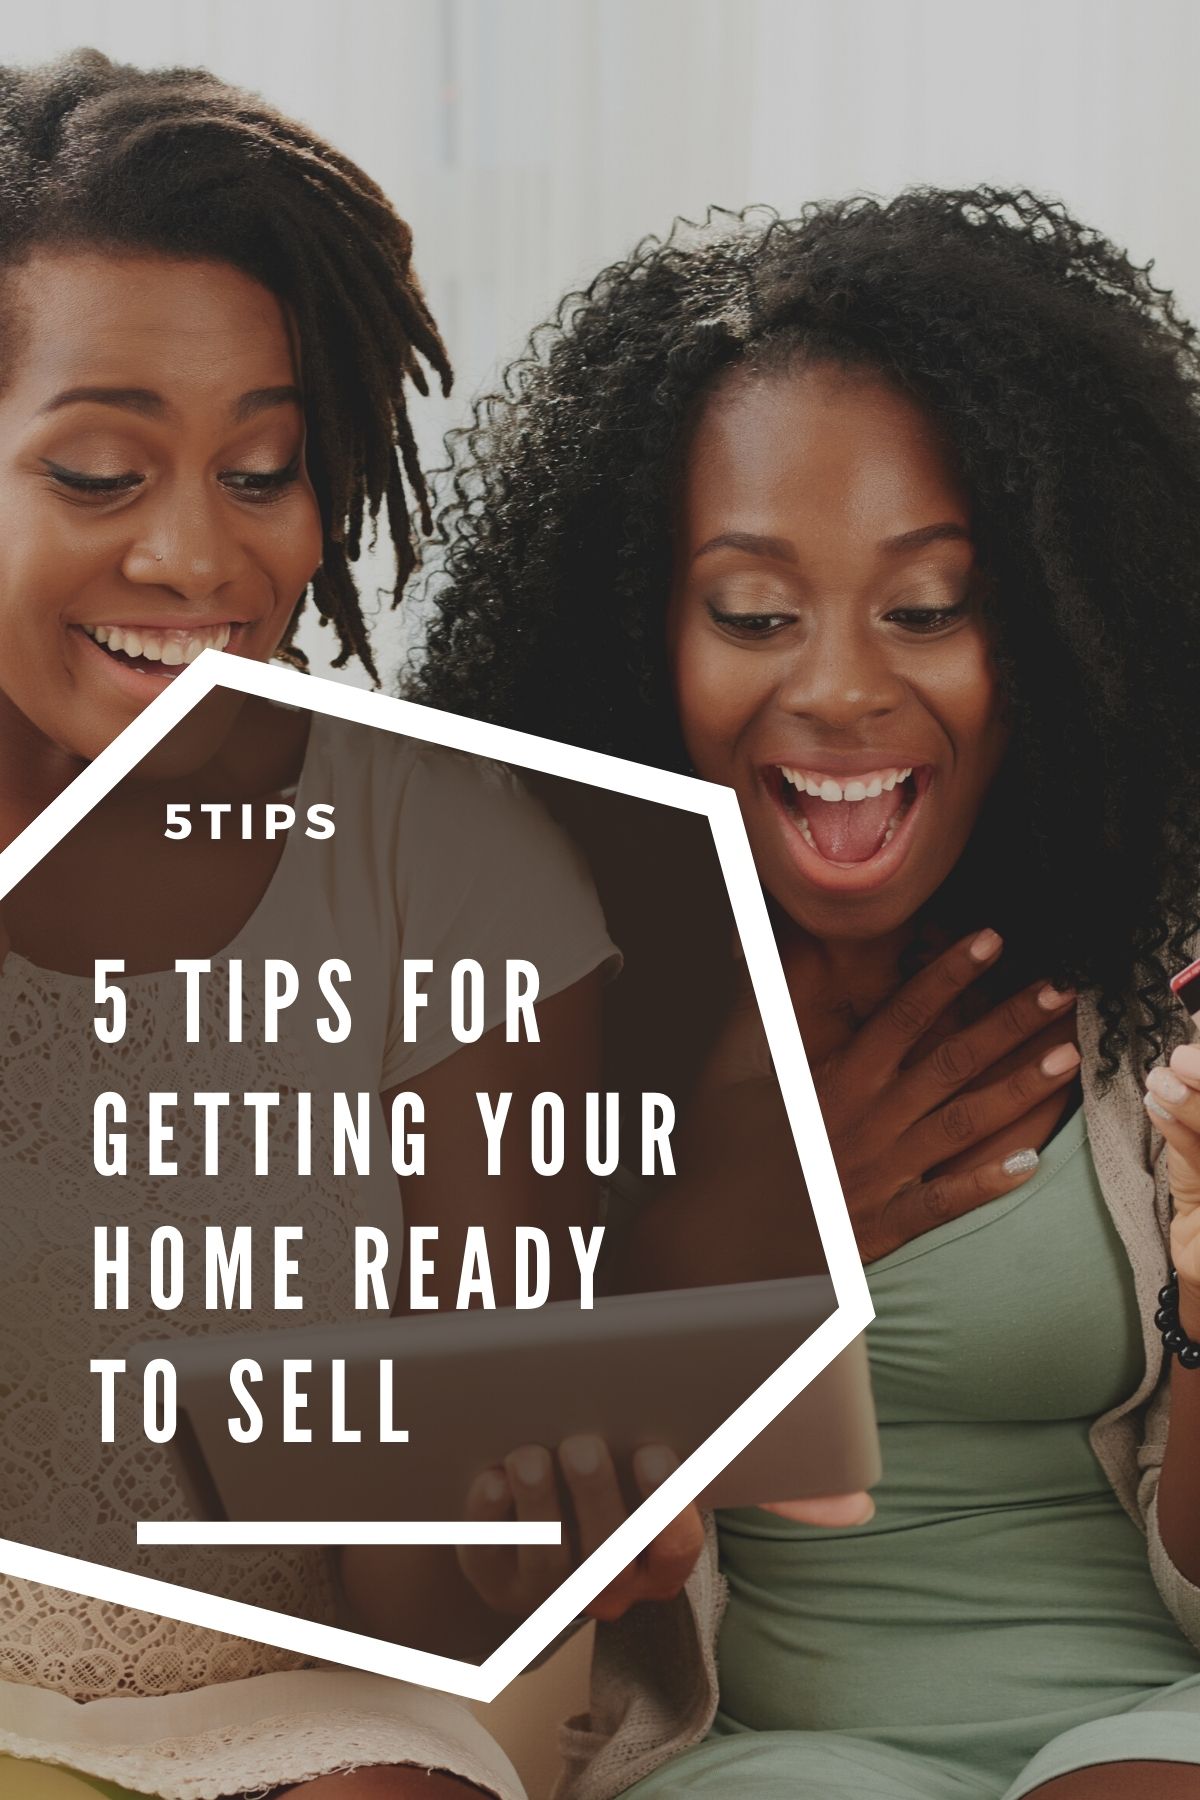 5 Tips for Getting Your Home Ready to Sell